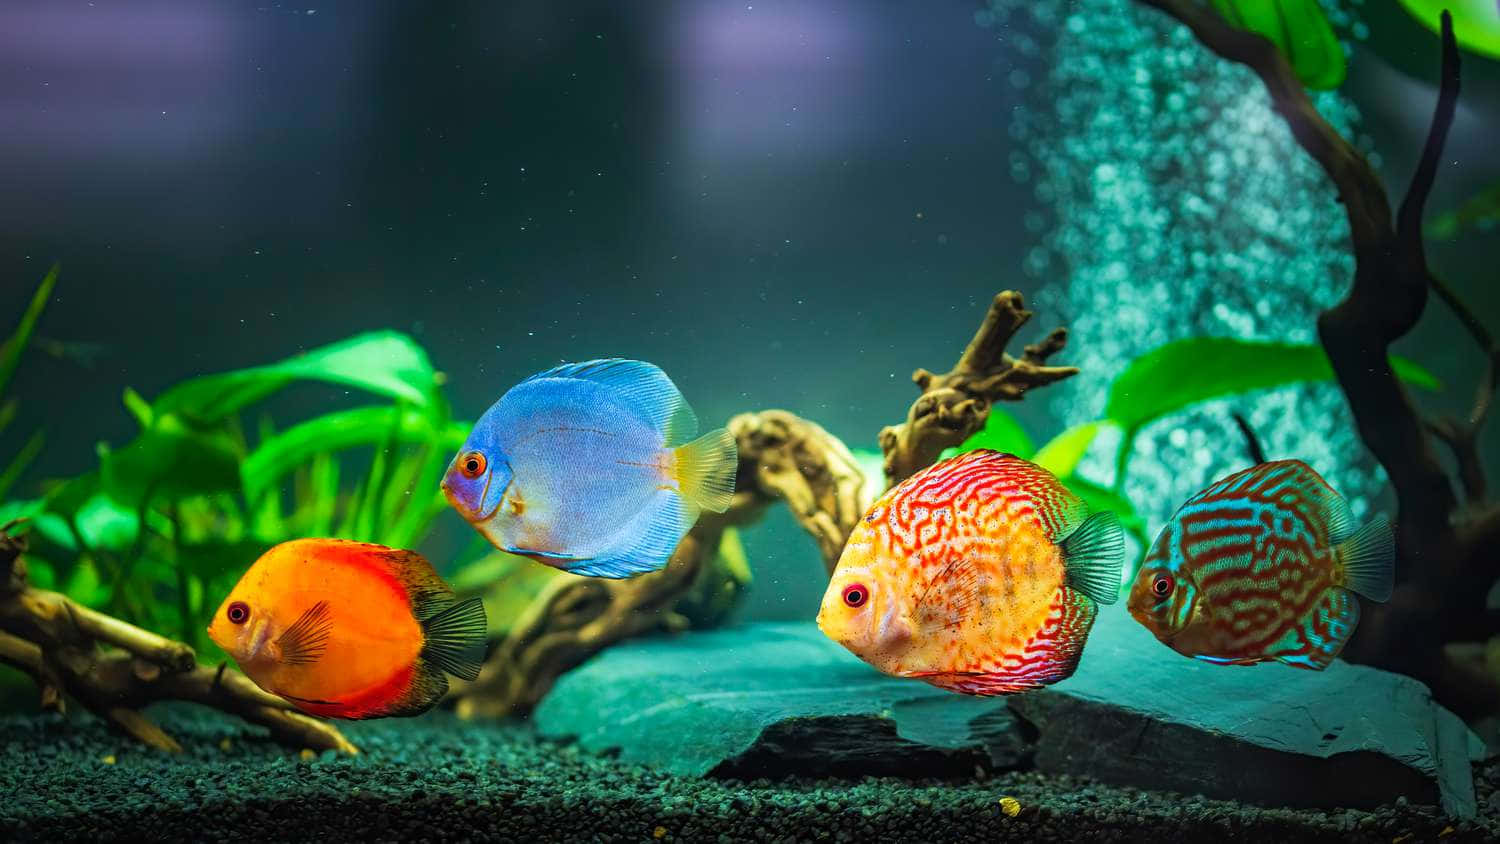 A Group Of Colorful Fish In An Aquarium Wallpaper